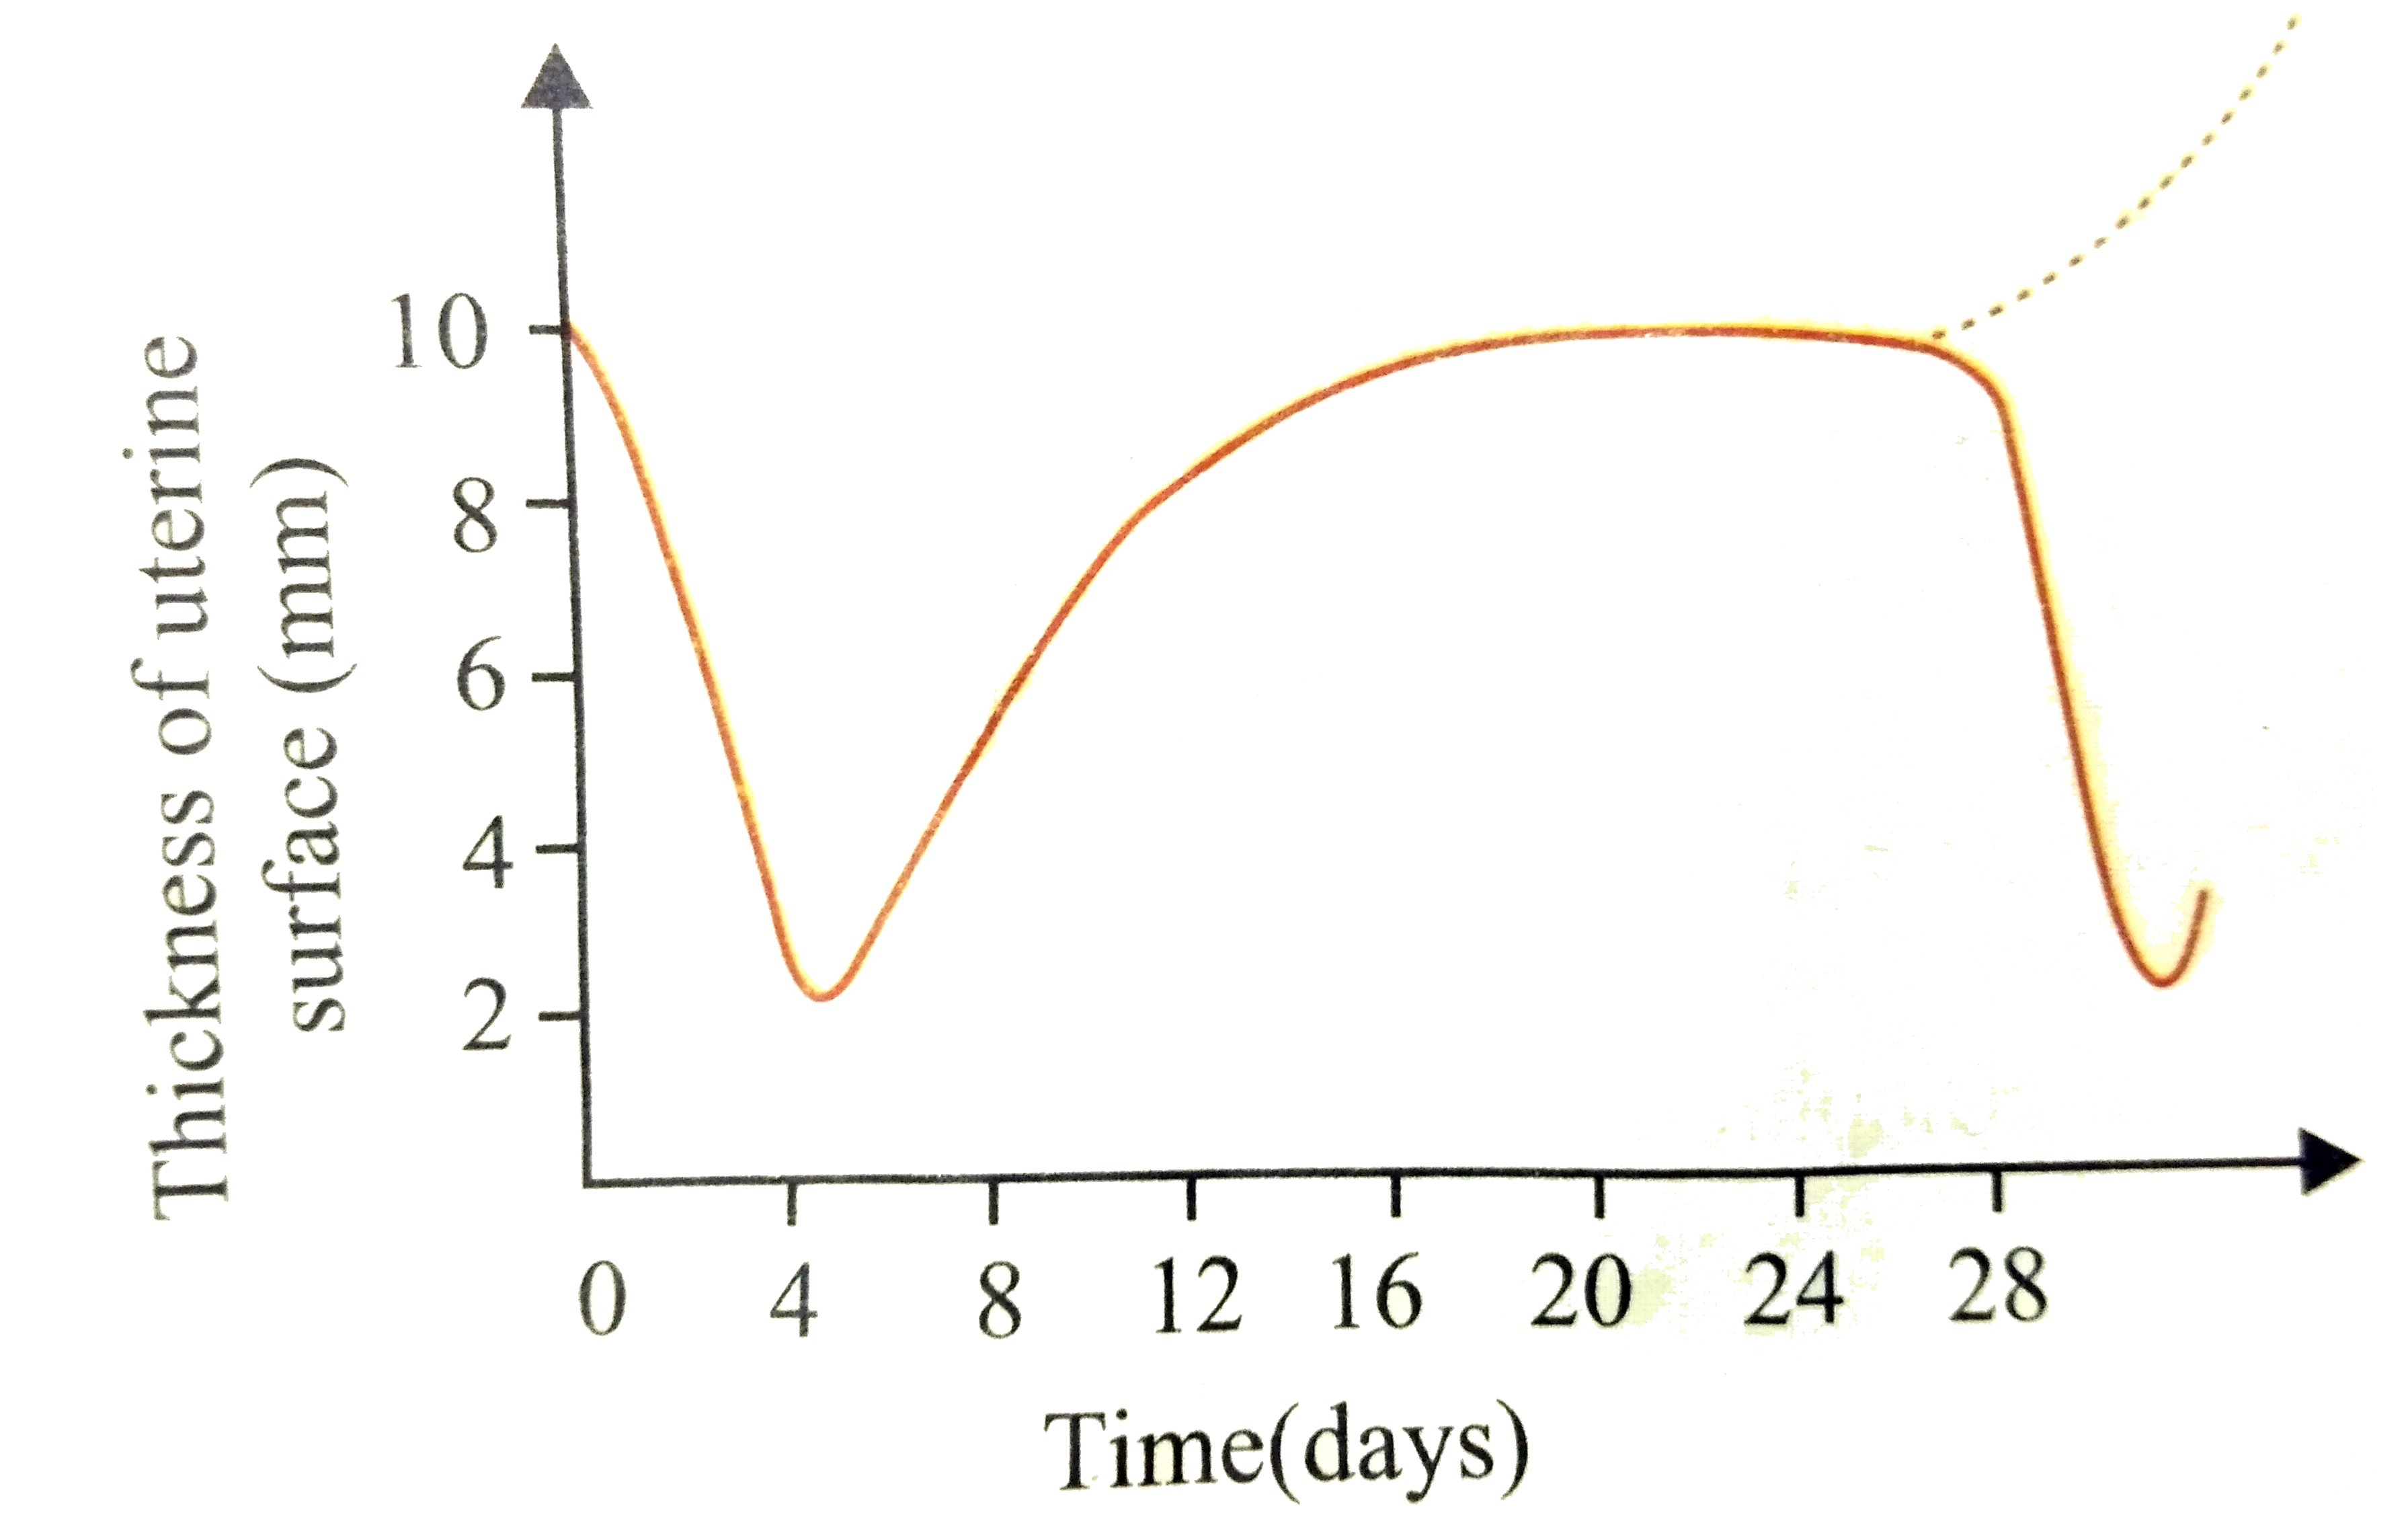 The given shows the thickness of the unterine layer of an adult woman during a period of time.   Which of the following conditions is expected to occur in the beginning, if the curve continues along the dotted line?